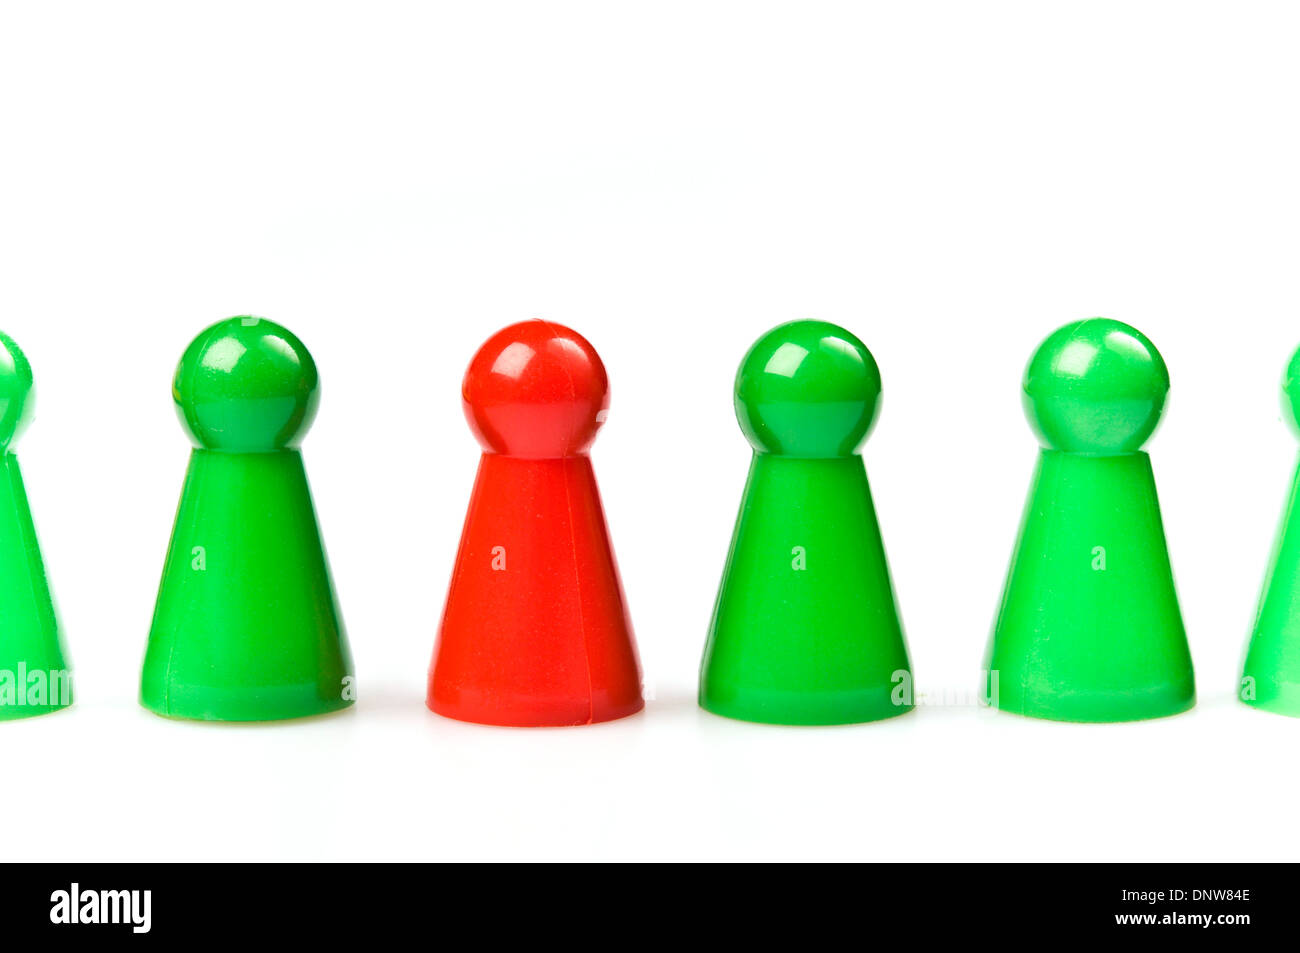 green plastic counters with one red, standing out concept Stock Photo